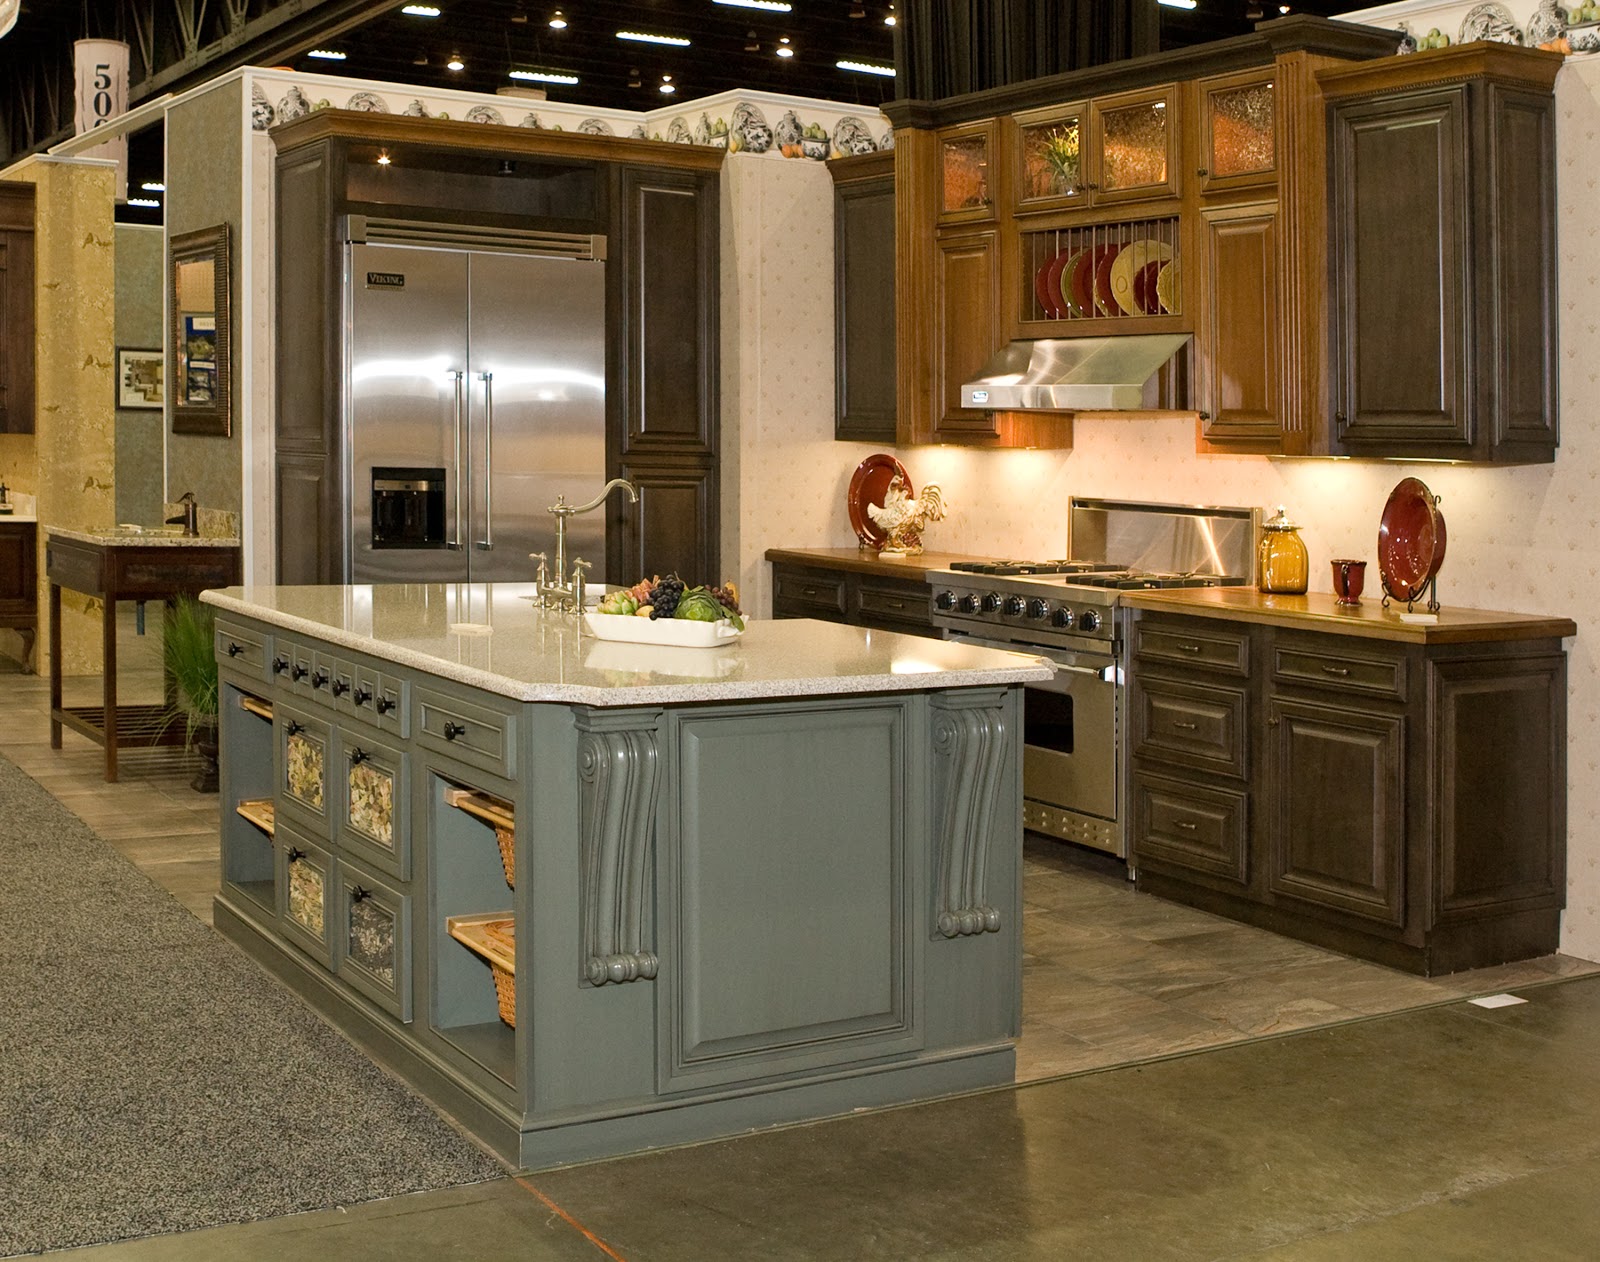 *Facebook Friday Freebie! Win 4 Tickets to the Atlanta Home Show!